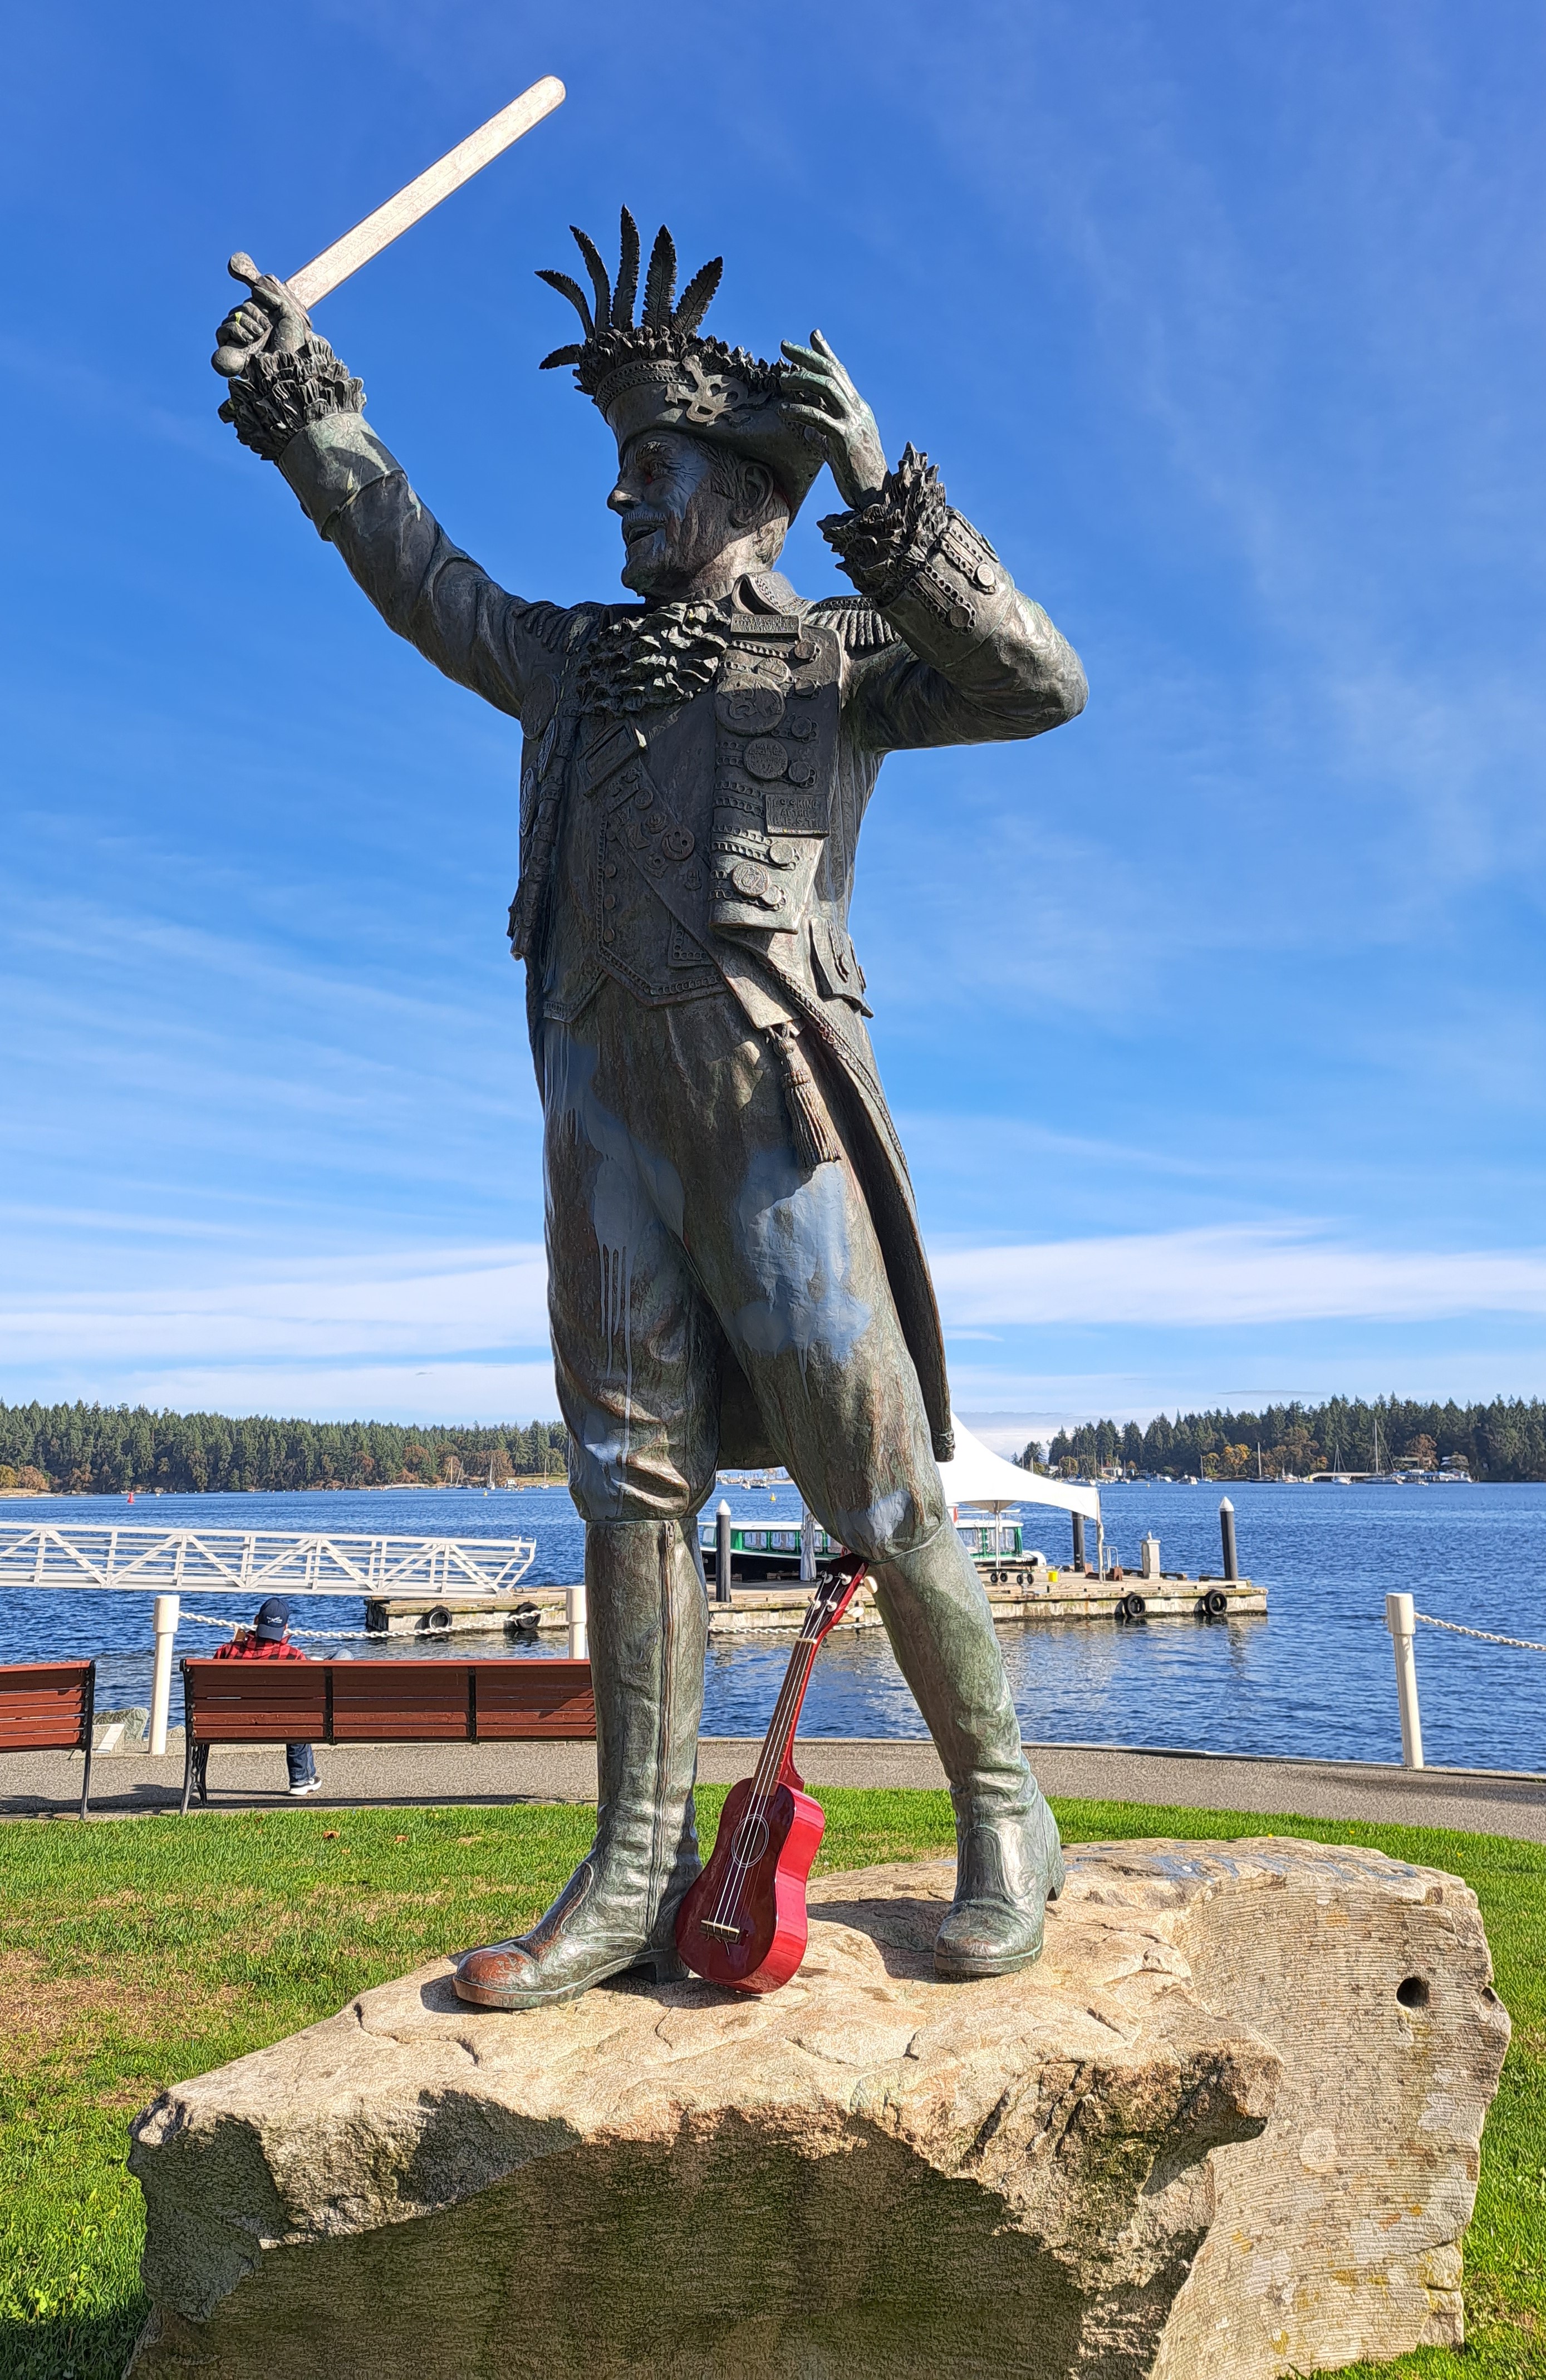 Though Frank Ney was wacky, the citizens of his hometown of Nanaimo accepted him as he was and even elected him to behttps://www.roadsideamerica.com/story/34151